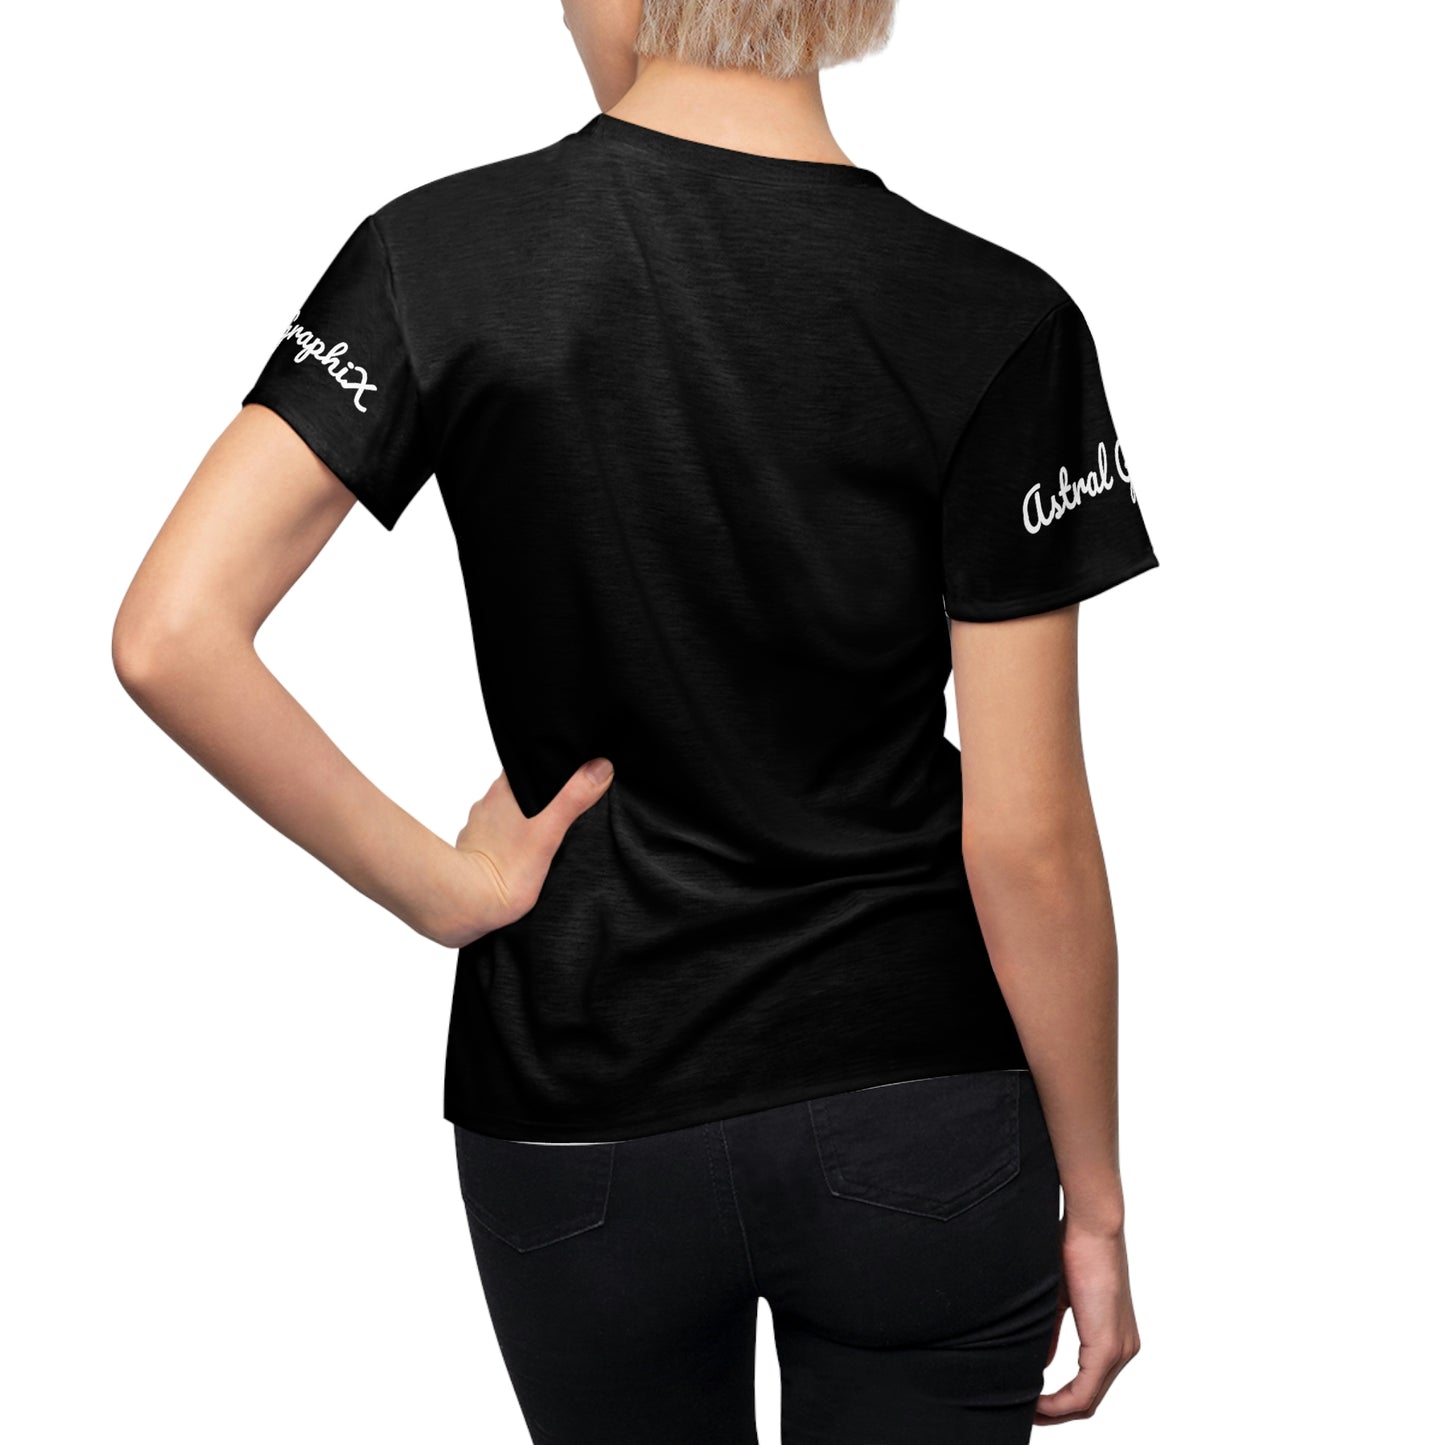 Word Art Collection - Women's Cut & Sew Tee (AOP) - Fast or Last in Black